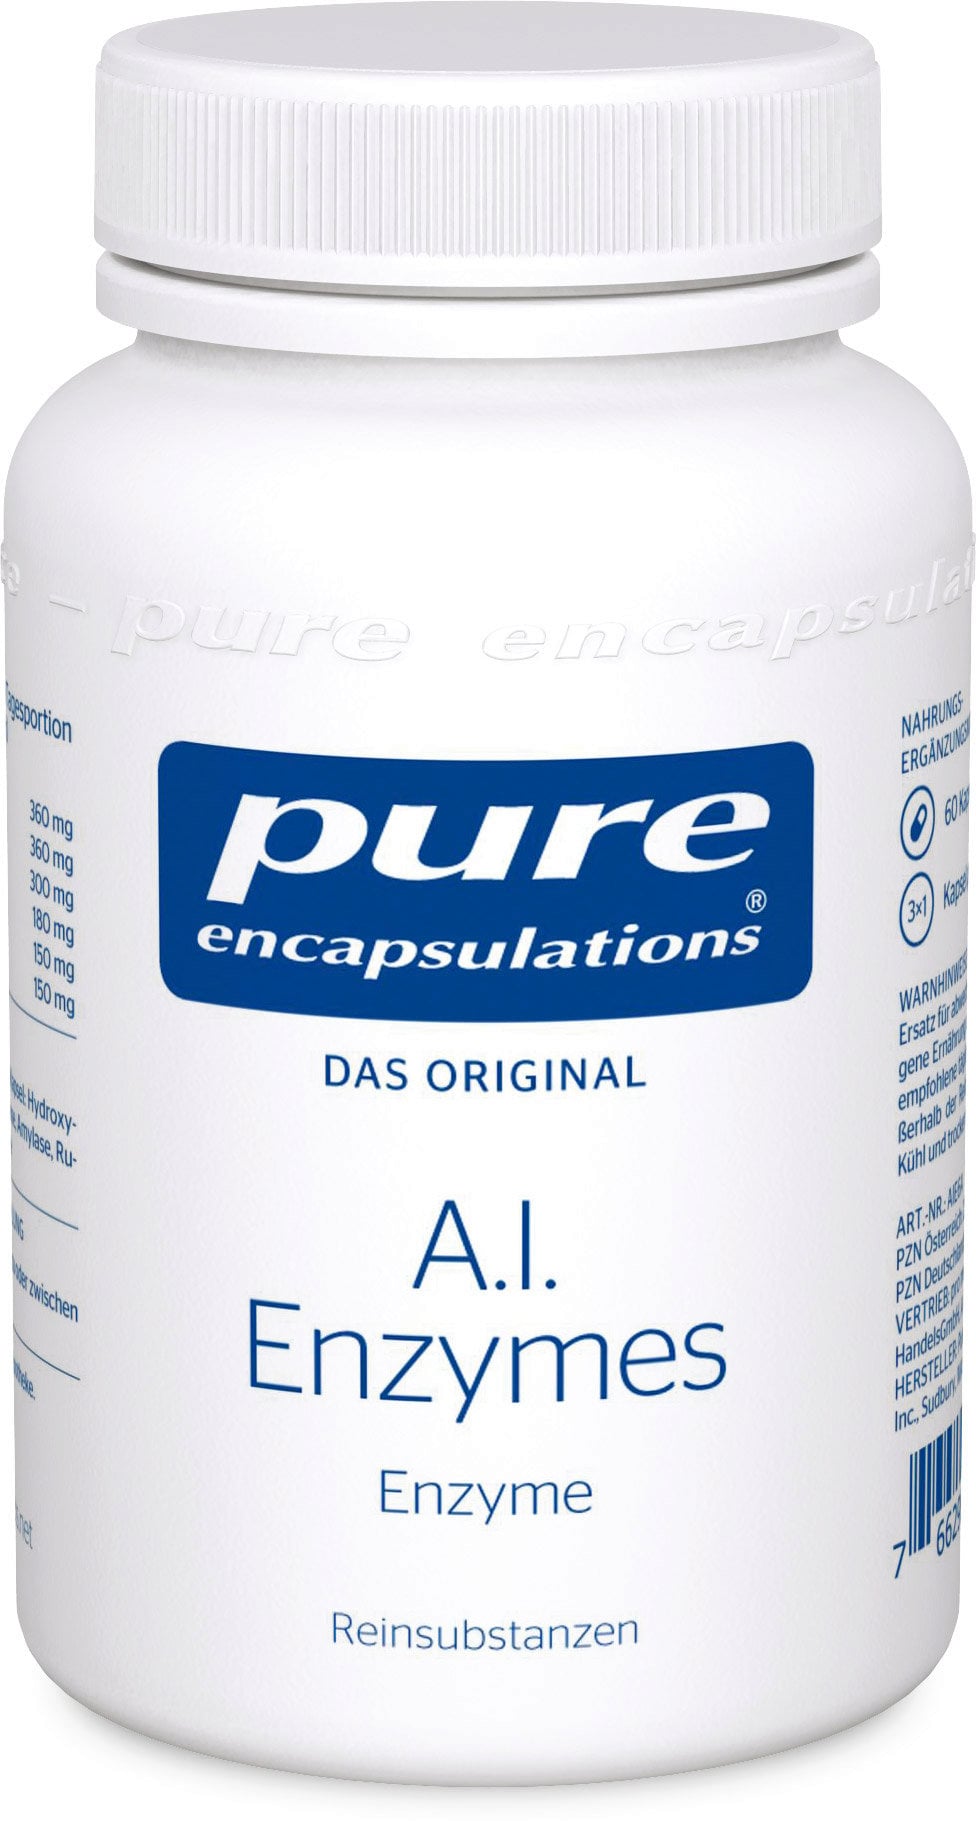 pure encapsulations A.I. Enzymes